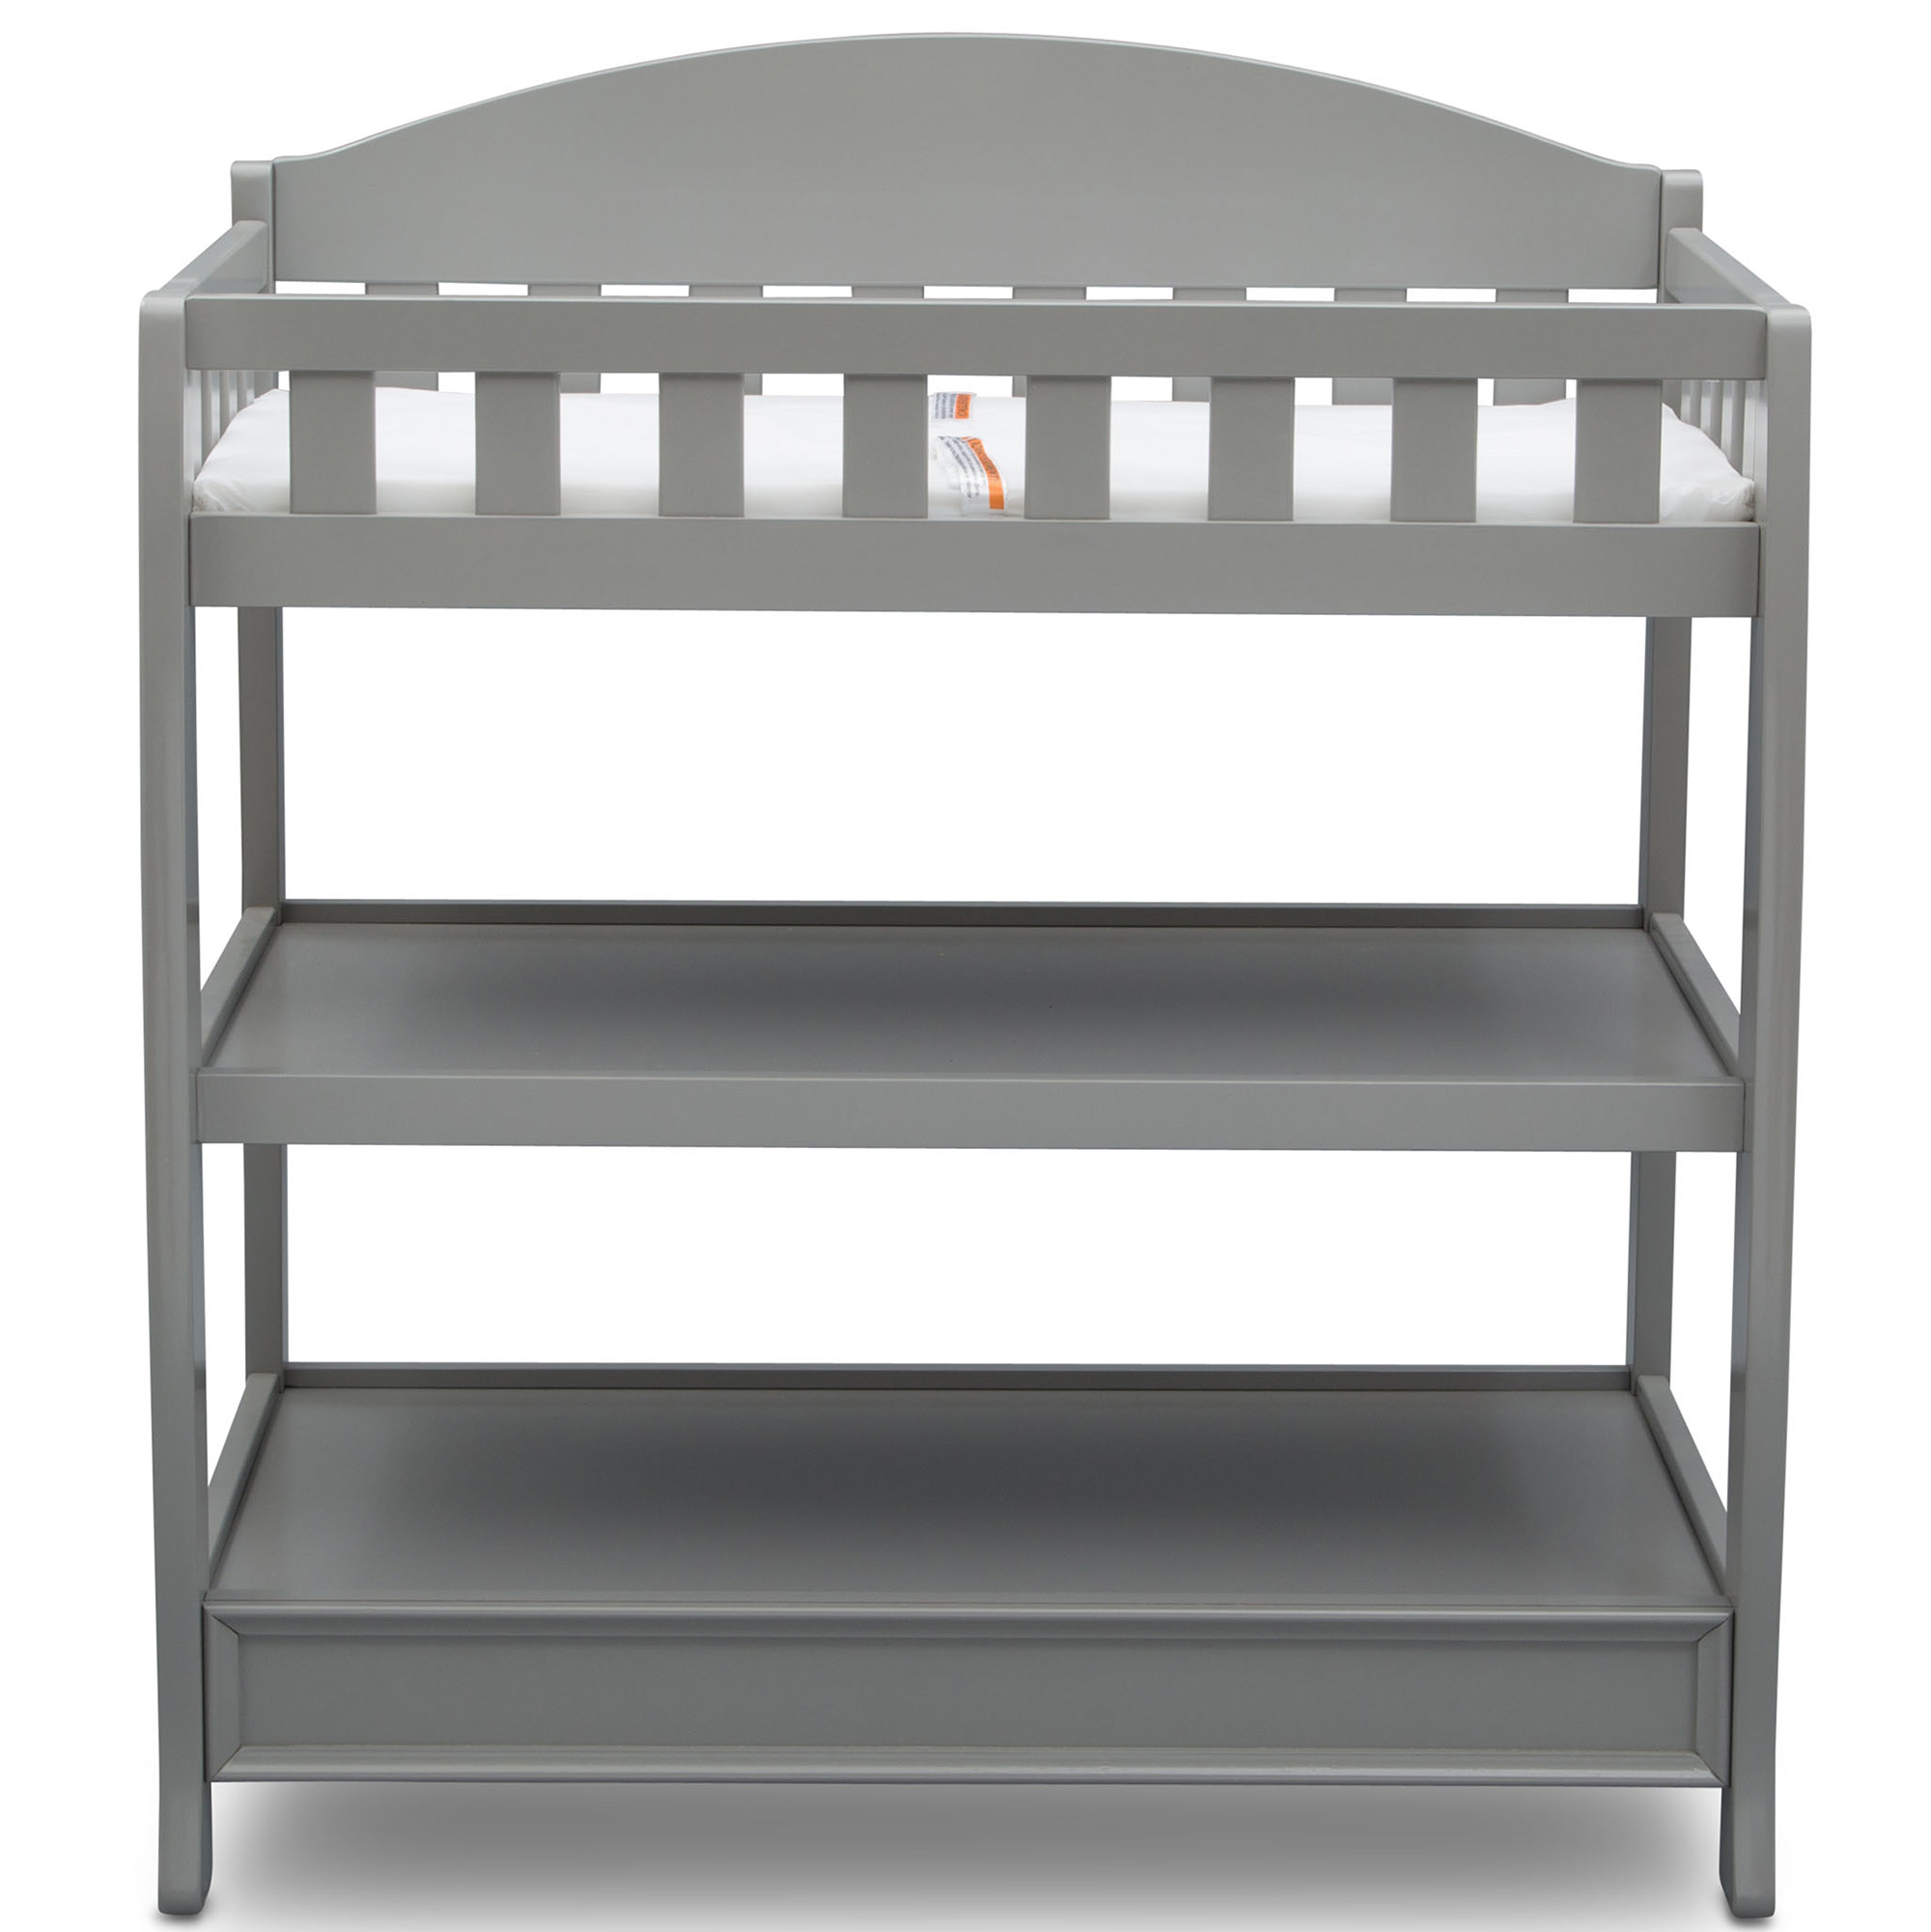 Delta Children Wilmington Changing Table with Pad, Grey - image 5 of 6